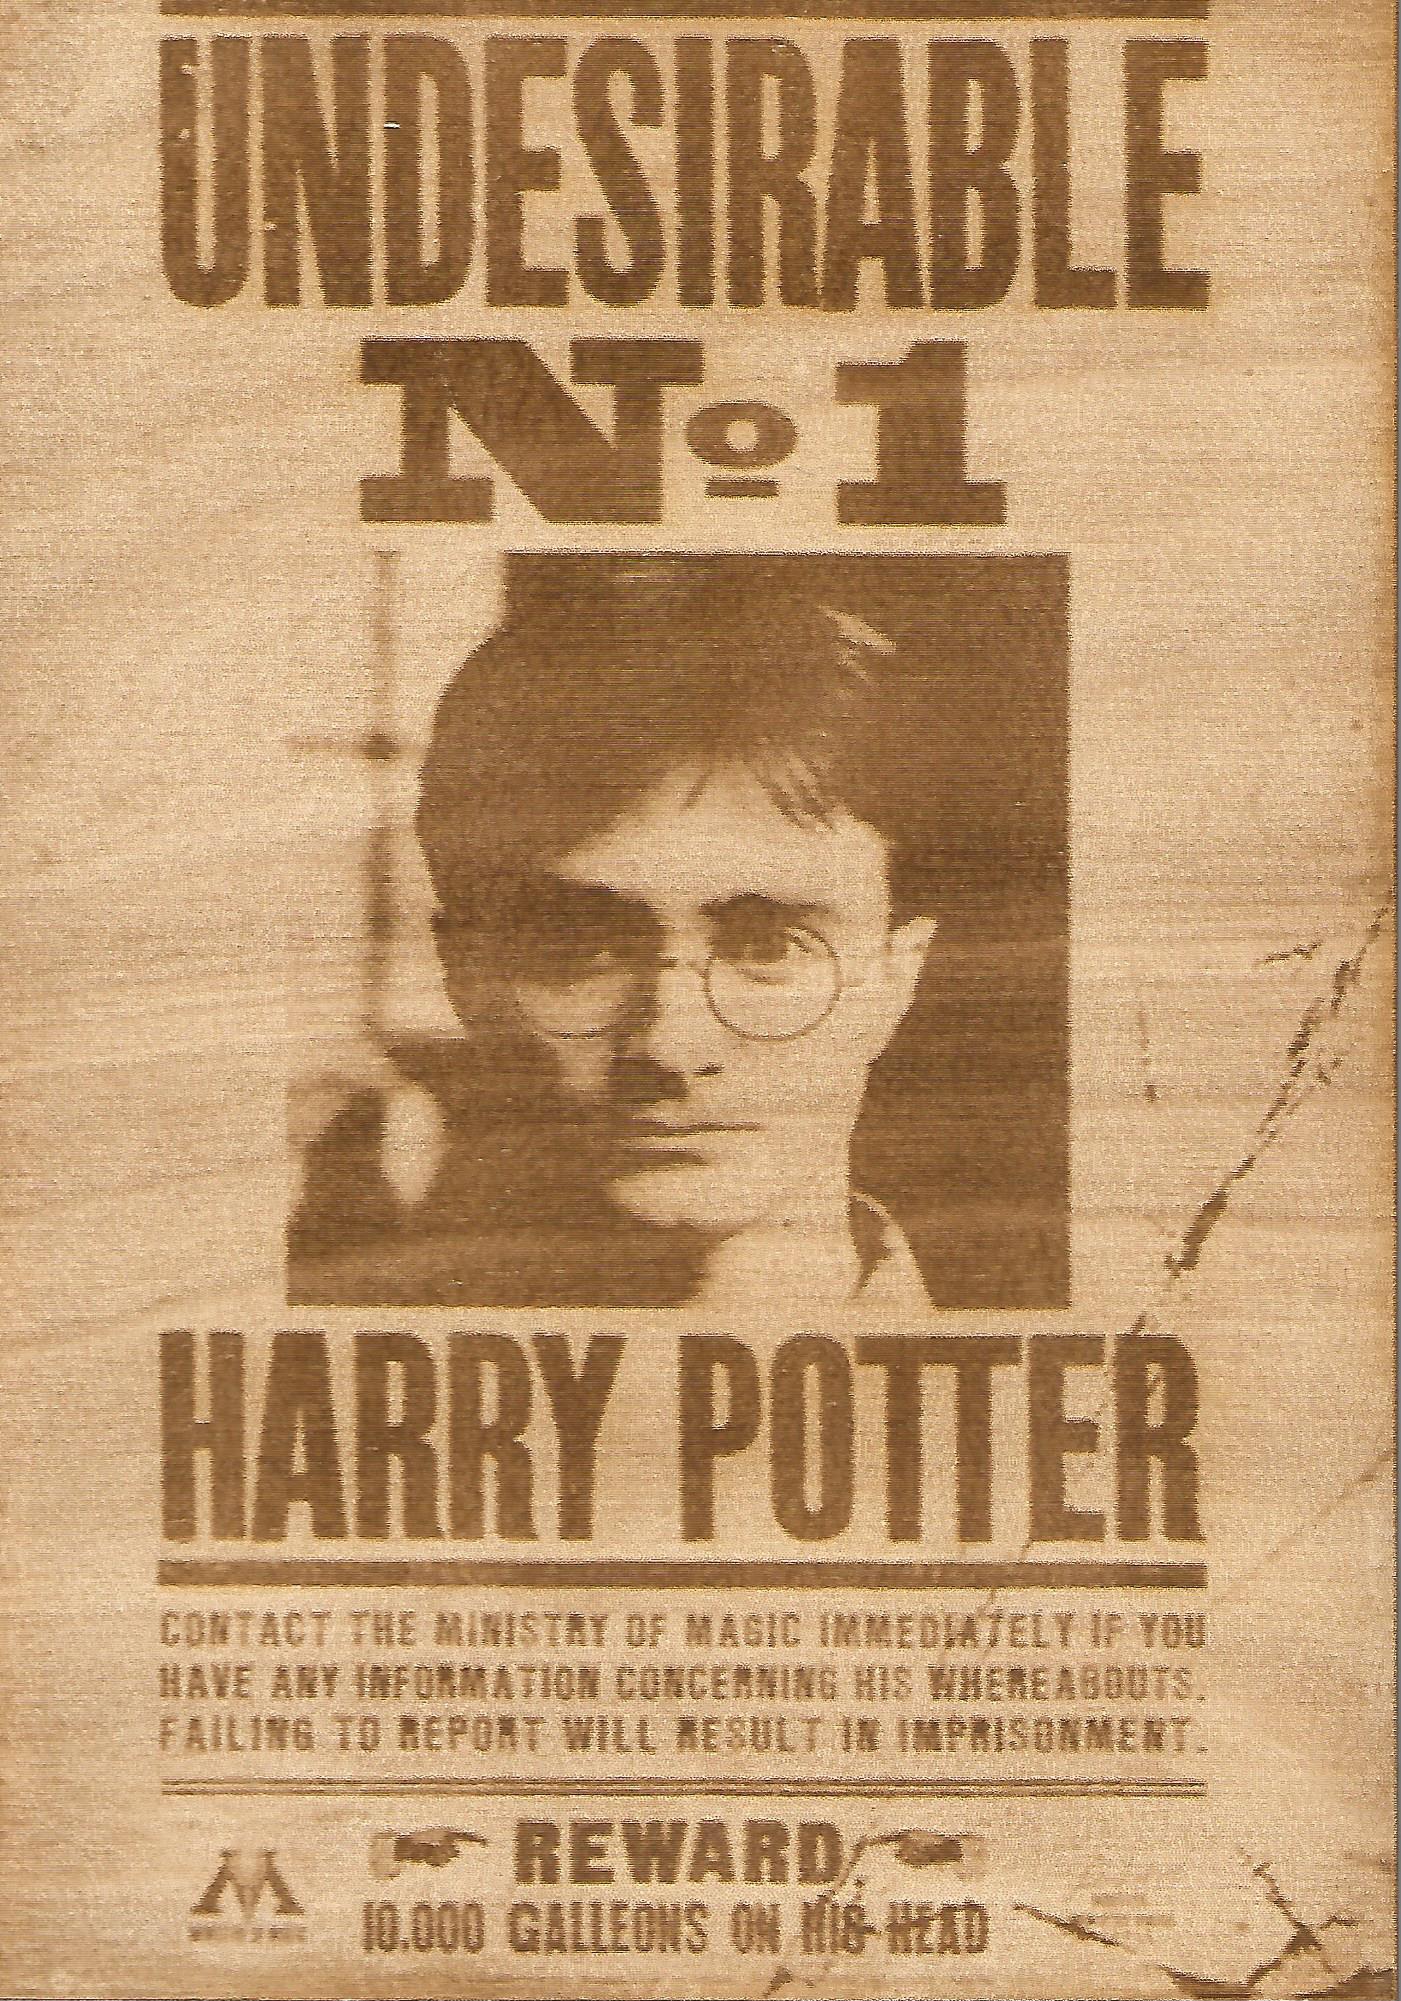 Harry Potter - Harry Potter (Undesirable No. 1) Wooden Wanted Poster